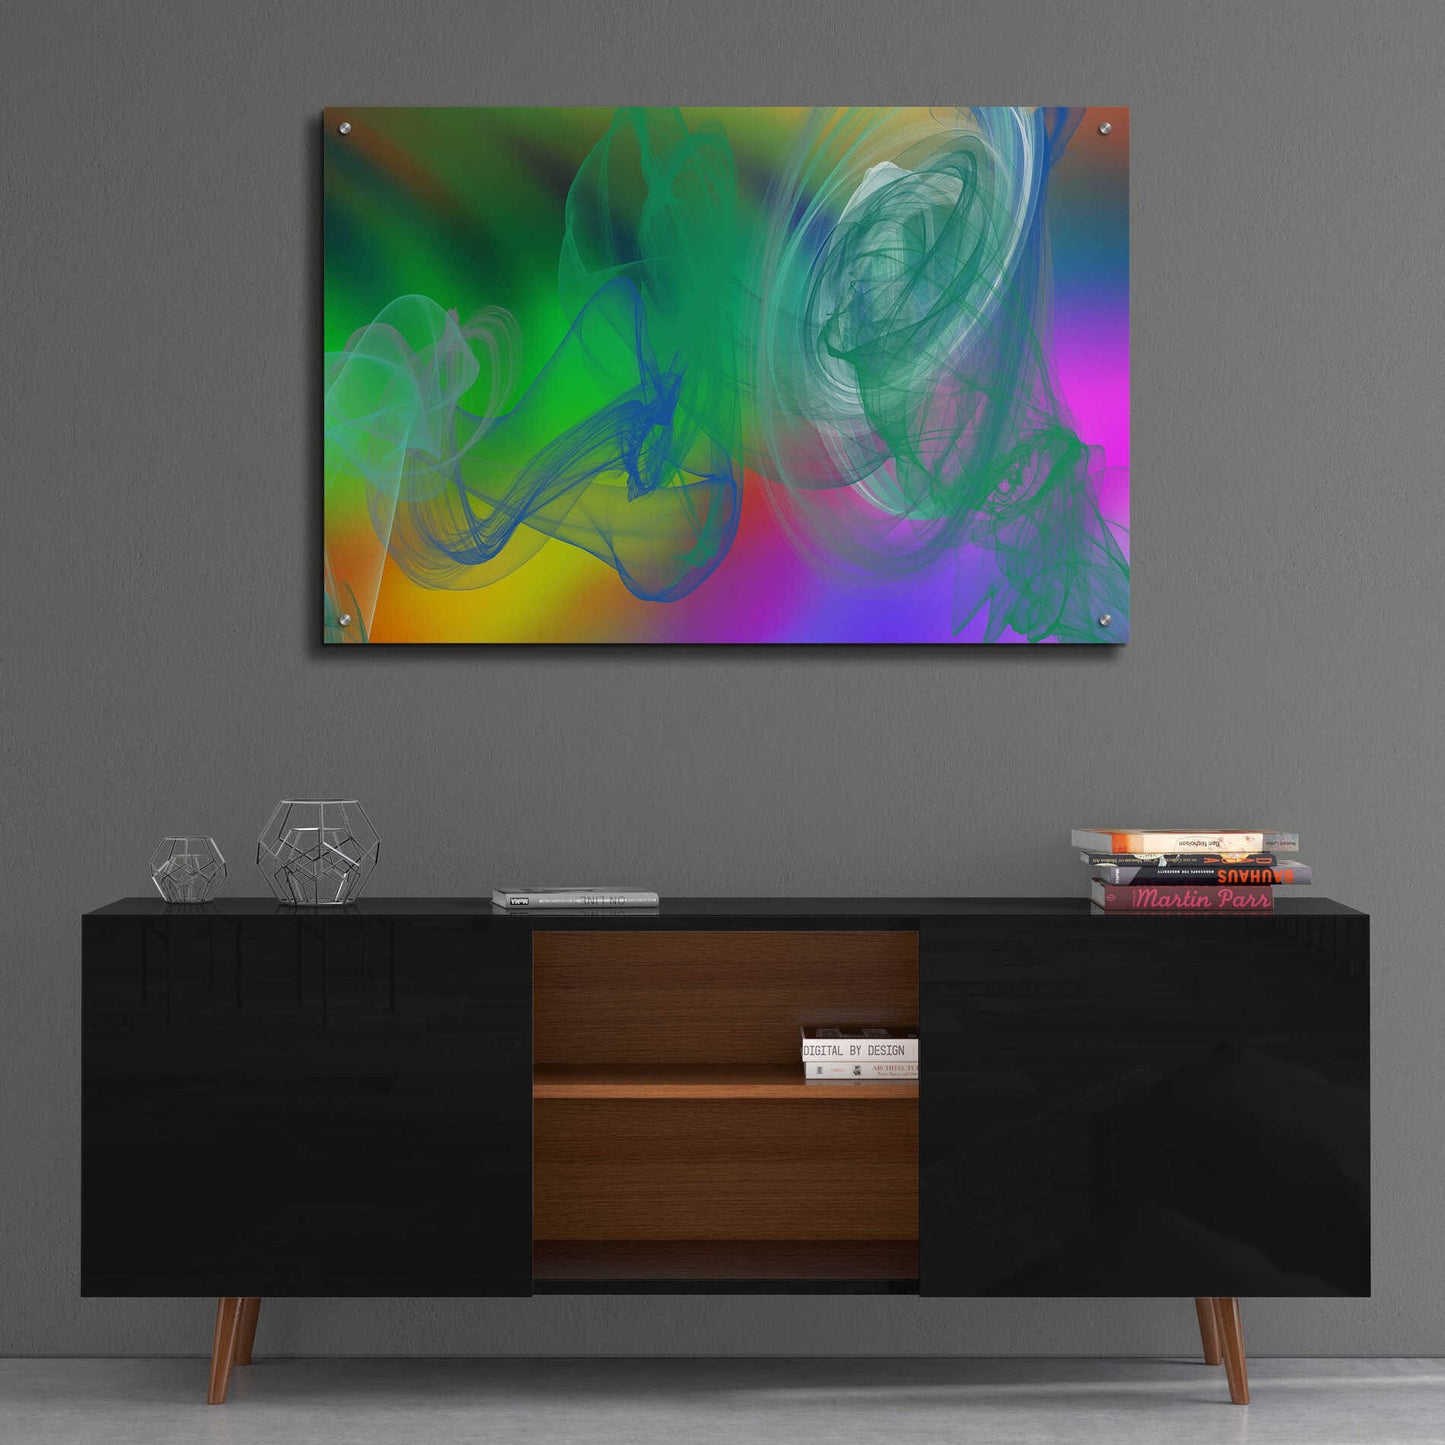 Epic Art 'Inverted Color In The Lines 5' by Irena Orlov Acrylic Glass Wall Art,36x24